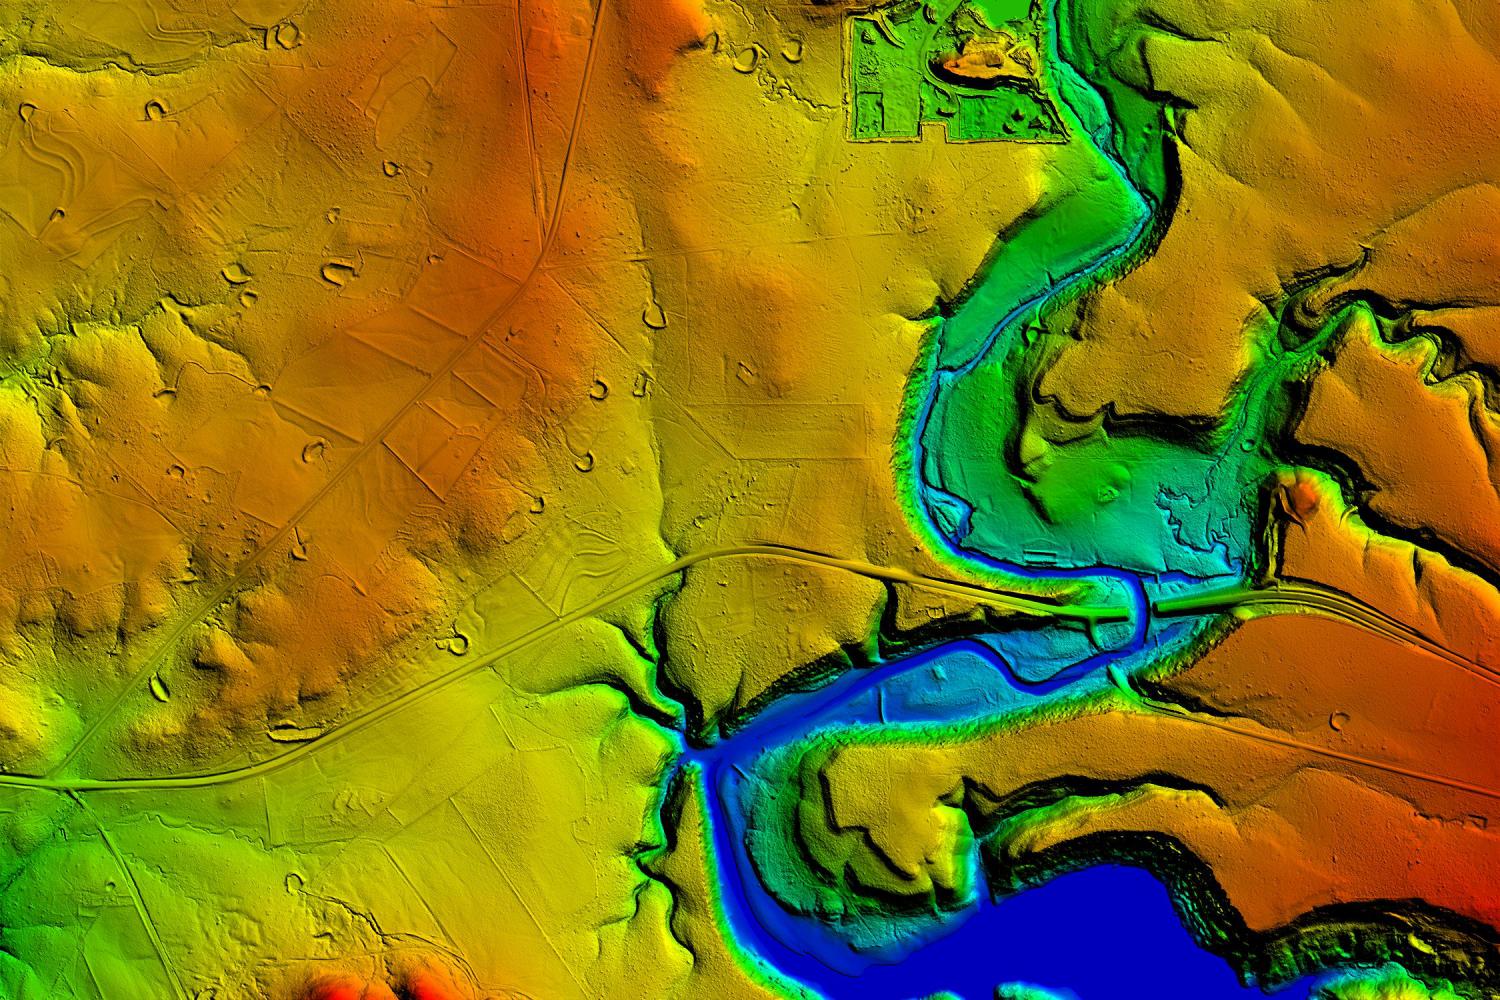 High quality LiDAR allows for more comprehensive modeling and mapping techniques.